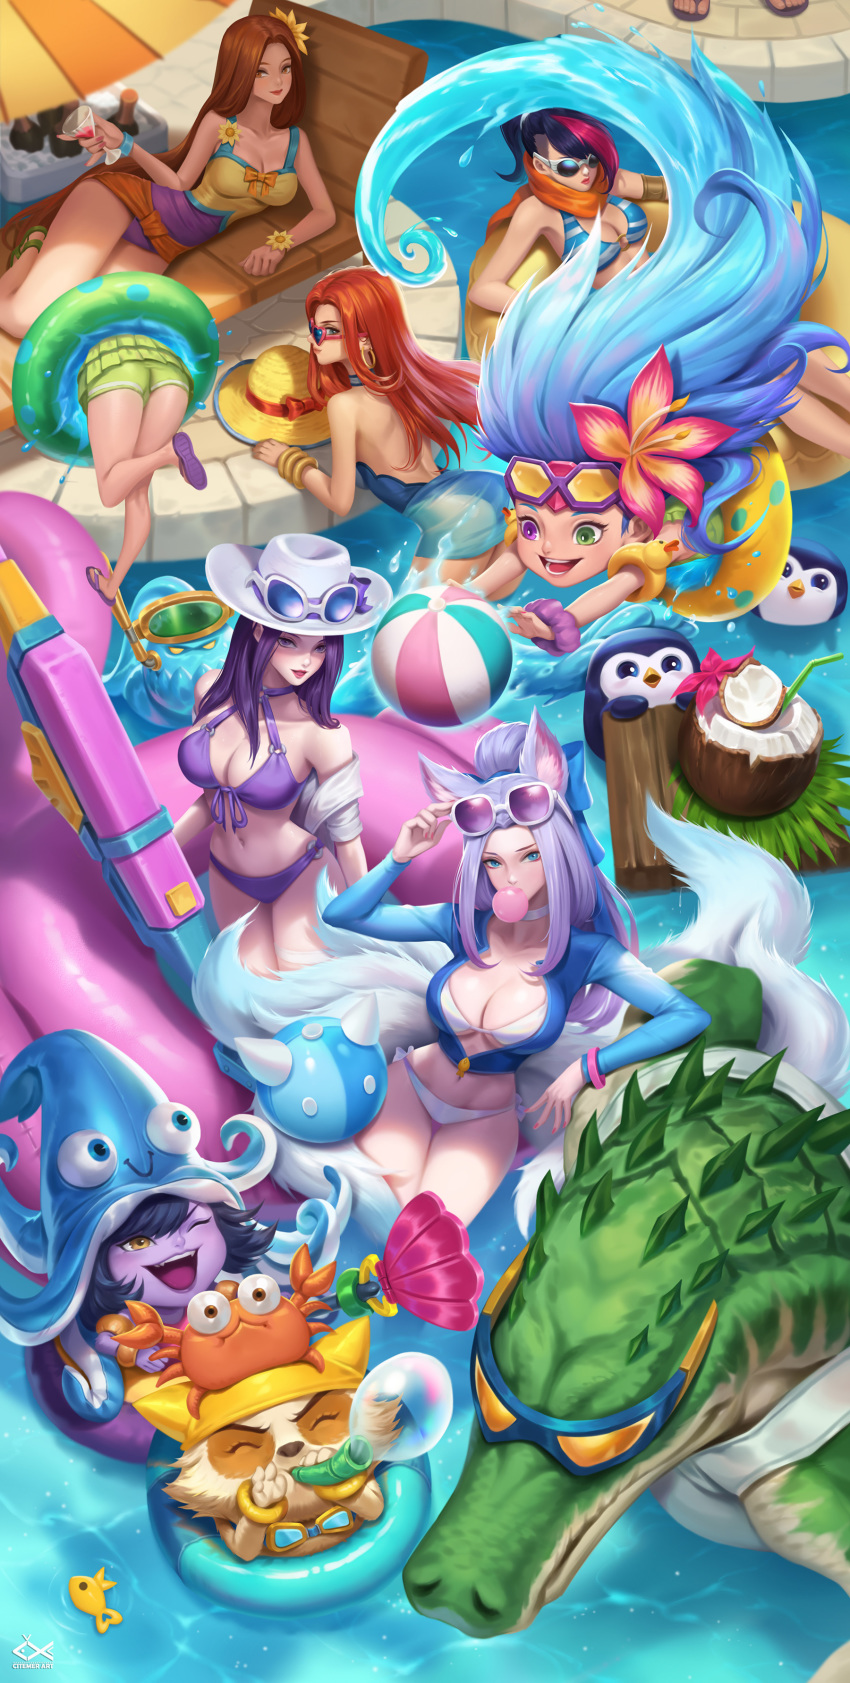 6+girls absurdres ahri animal_ears ball beach_chair beachball bikini bird black_hair blue_eyes blue_hair bow breasts brown_eyes bubble bubble_blowing chewing_gum citemer cleavage closed_eyes coconut crab cup drinking_glass drinking_straw earrings fangs fiora_laurent flower fox_ears fox_tail fur hair_flower hair_ornament hat heterochromia highres hoop_earrings innertube jacket jewelry large_breasts lavender_hair league_of_legends leona_(league_of_legends) lipstick long_hair lulu_(league_of_legends) lying makeup multicolored_hair multiple_boys multiple_girls navel open_clothes open_mouth orange_eyes orange_hair partially_submerged penguin pink_hair pool pool_party_caitlyn pool_party_fiora pool_party_leona pool_party_lulu pool_party_miss_fortune pool_party_renekton pool_party_zoe purple_eyes purple_hair purple_skin red_hair renekton rubber_duck sarah_fortune scarf scrunchie slippers smile snorkel staff streaked_hair sunglasses swimsuit tail teemo tentacles two-tone_hair unzipped very_long_hair water yordle zac zoe_(league_of_legends)